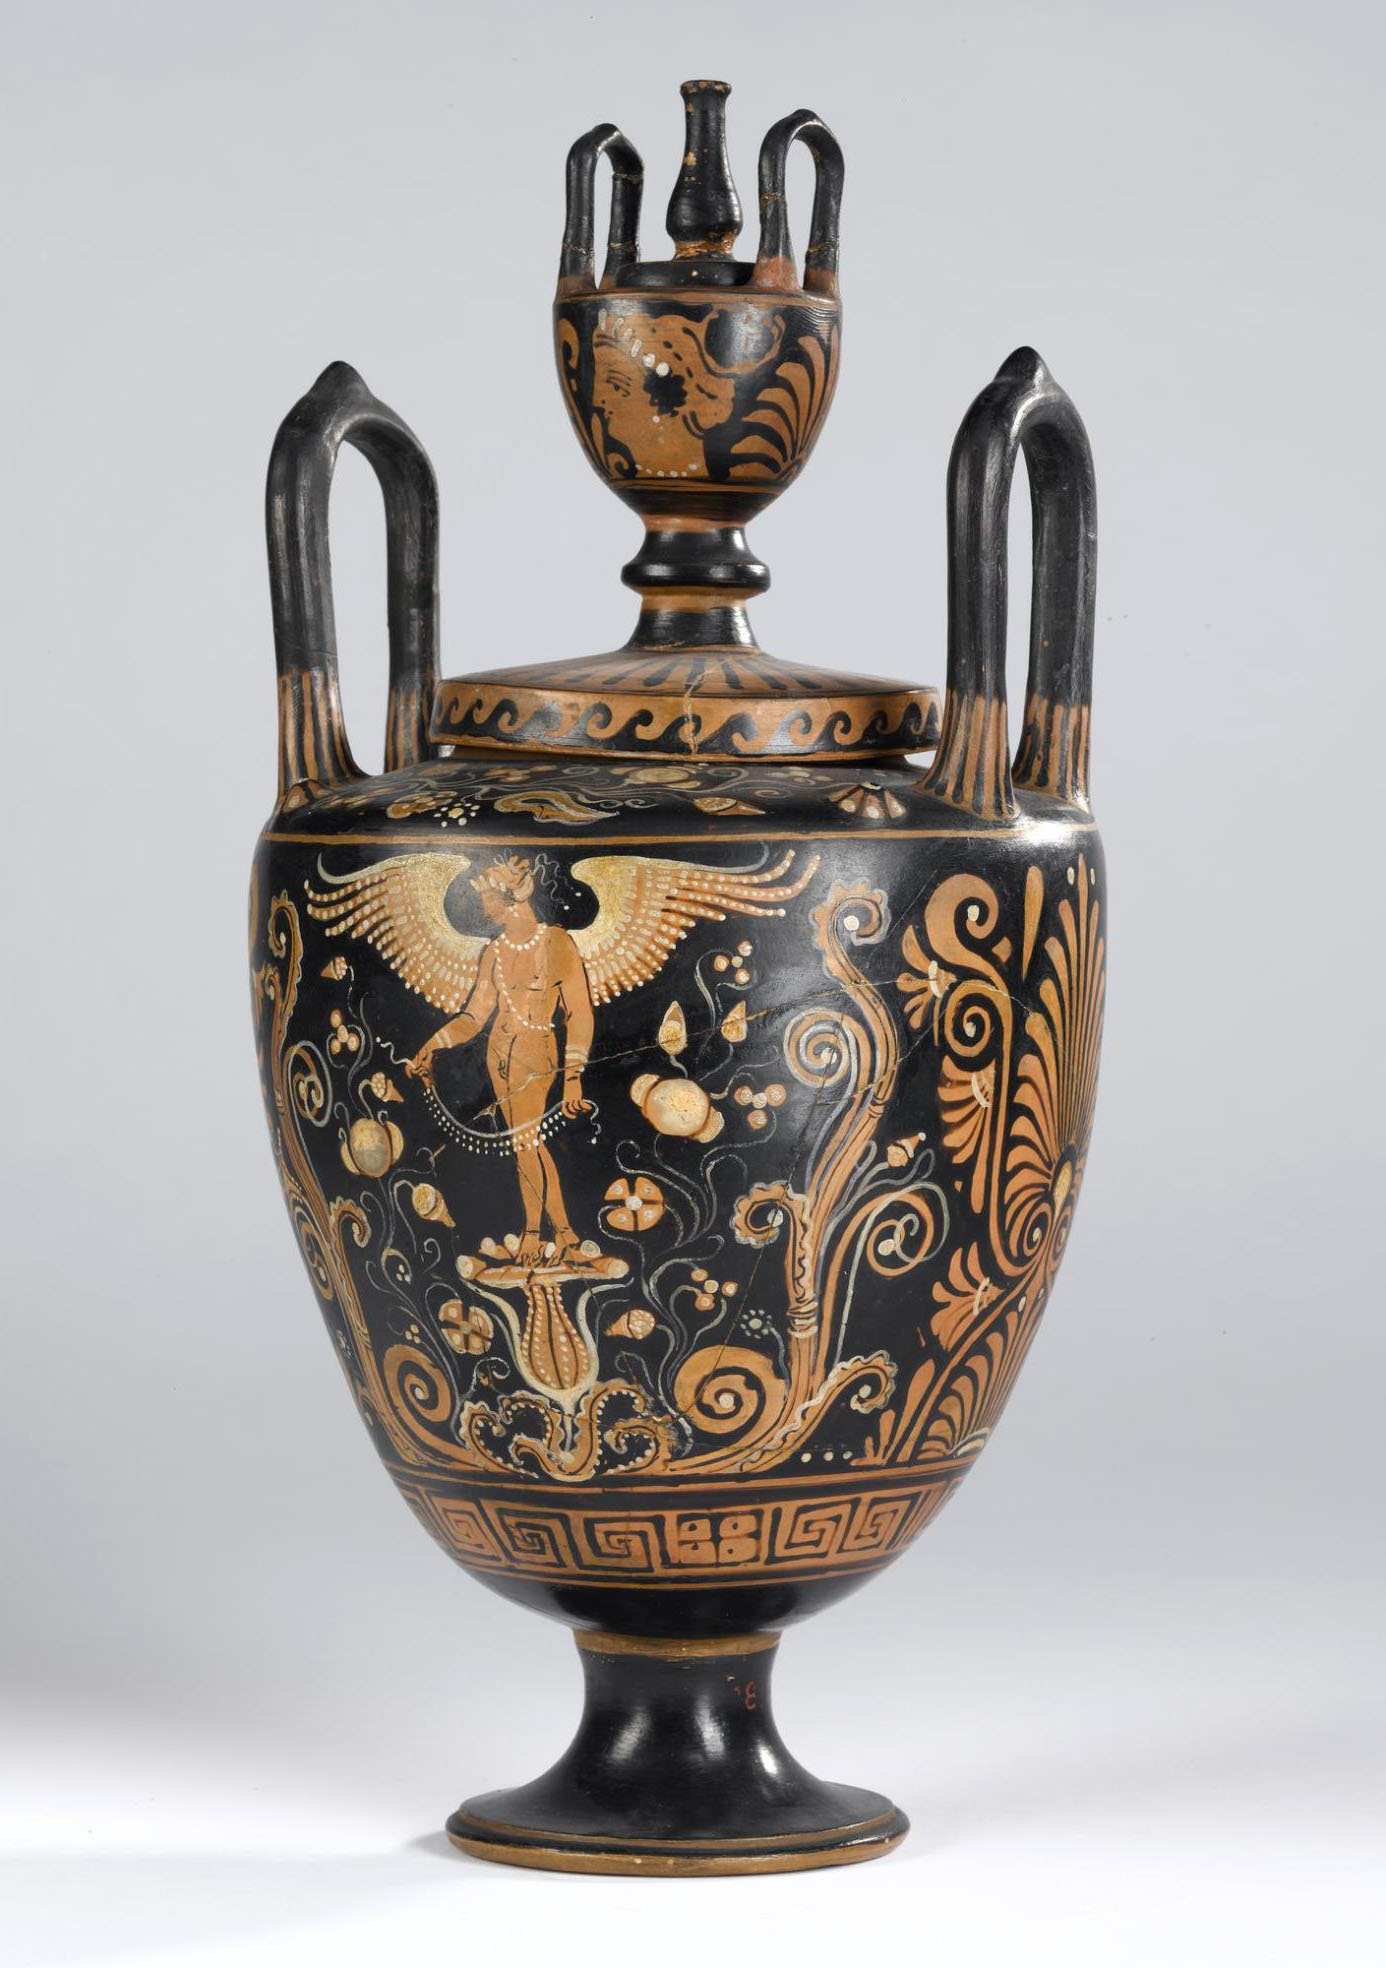 Lebes gamikos of pottery decorated in red figure style with two standing figures of Eros, palmettes, key meander and scrollwork.